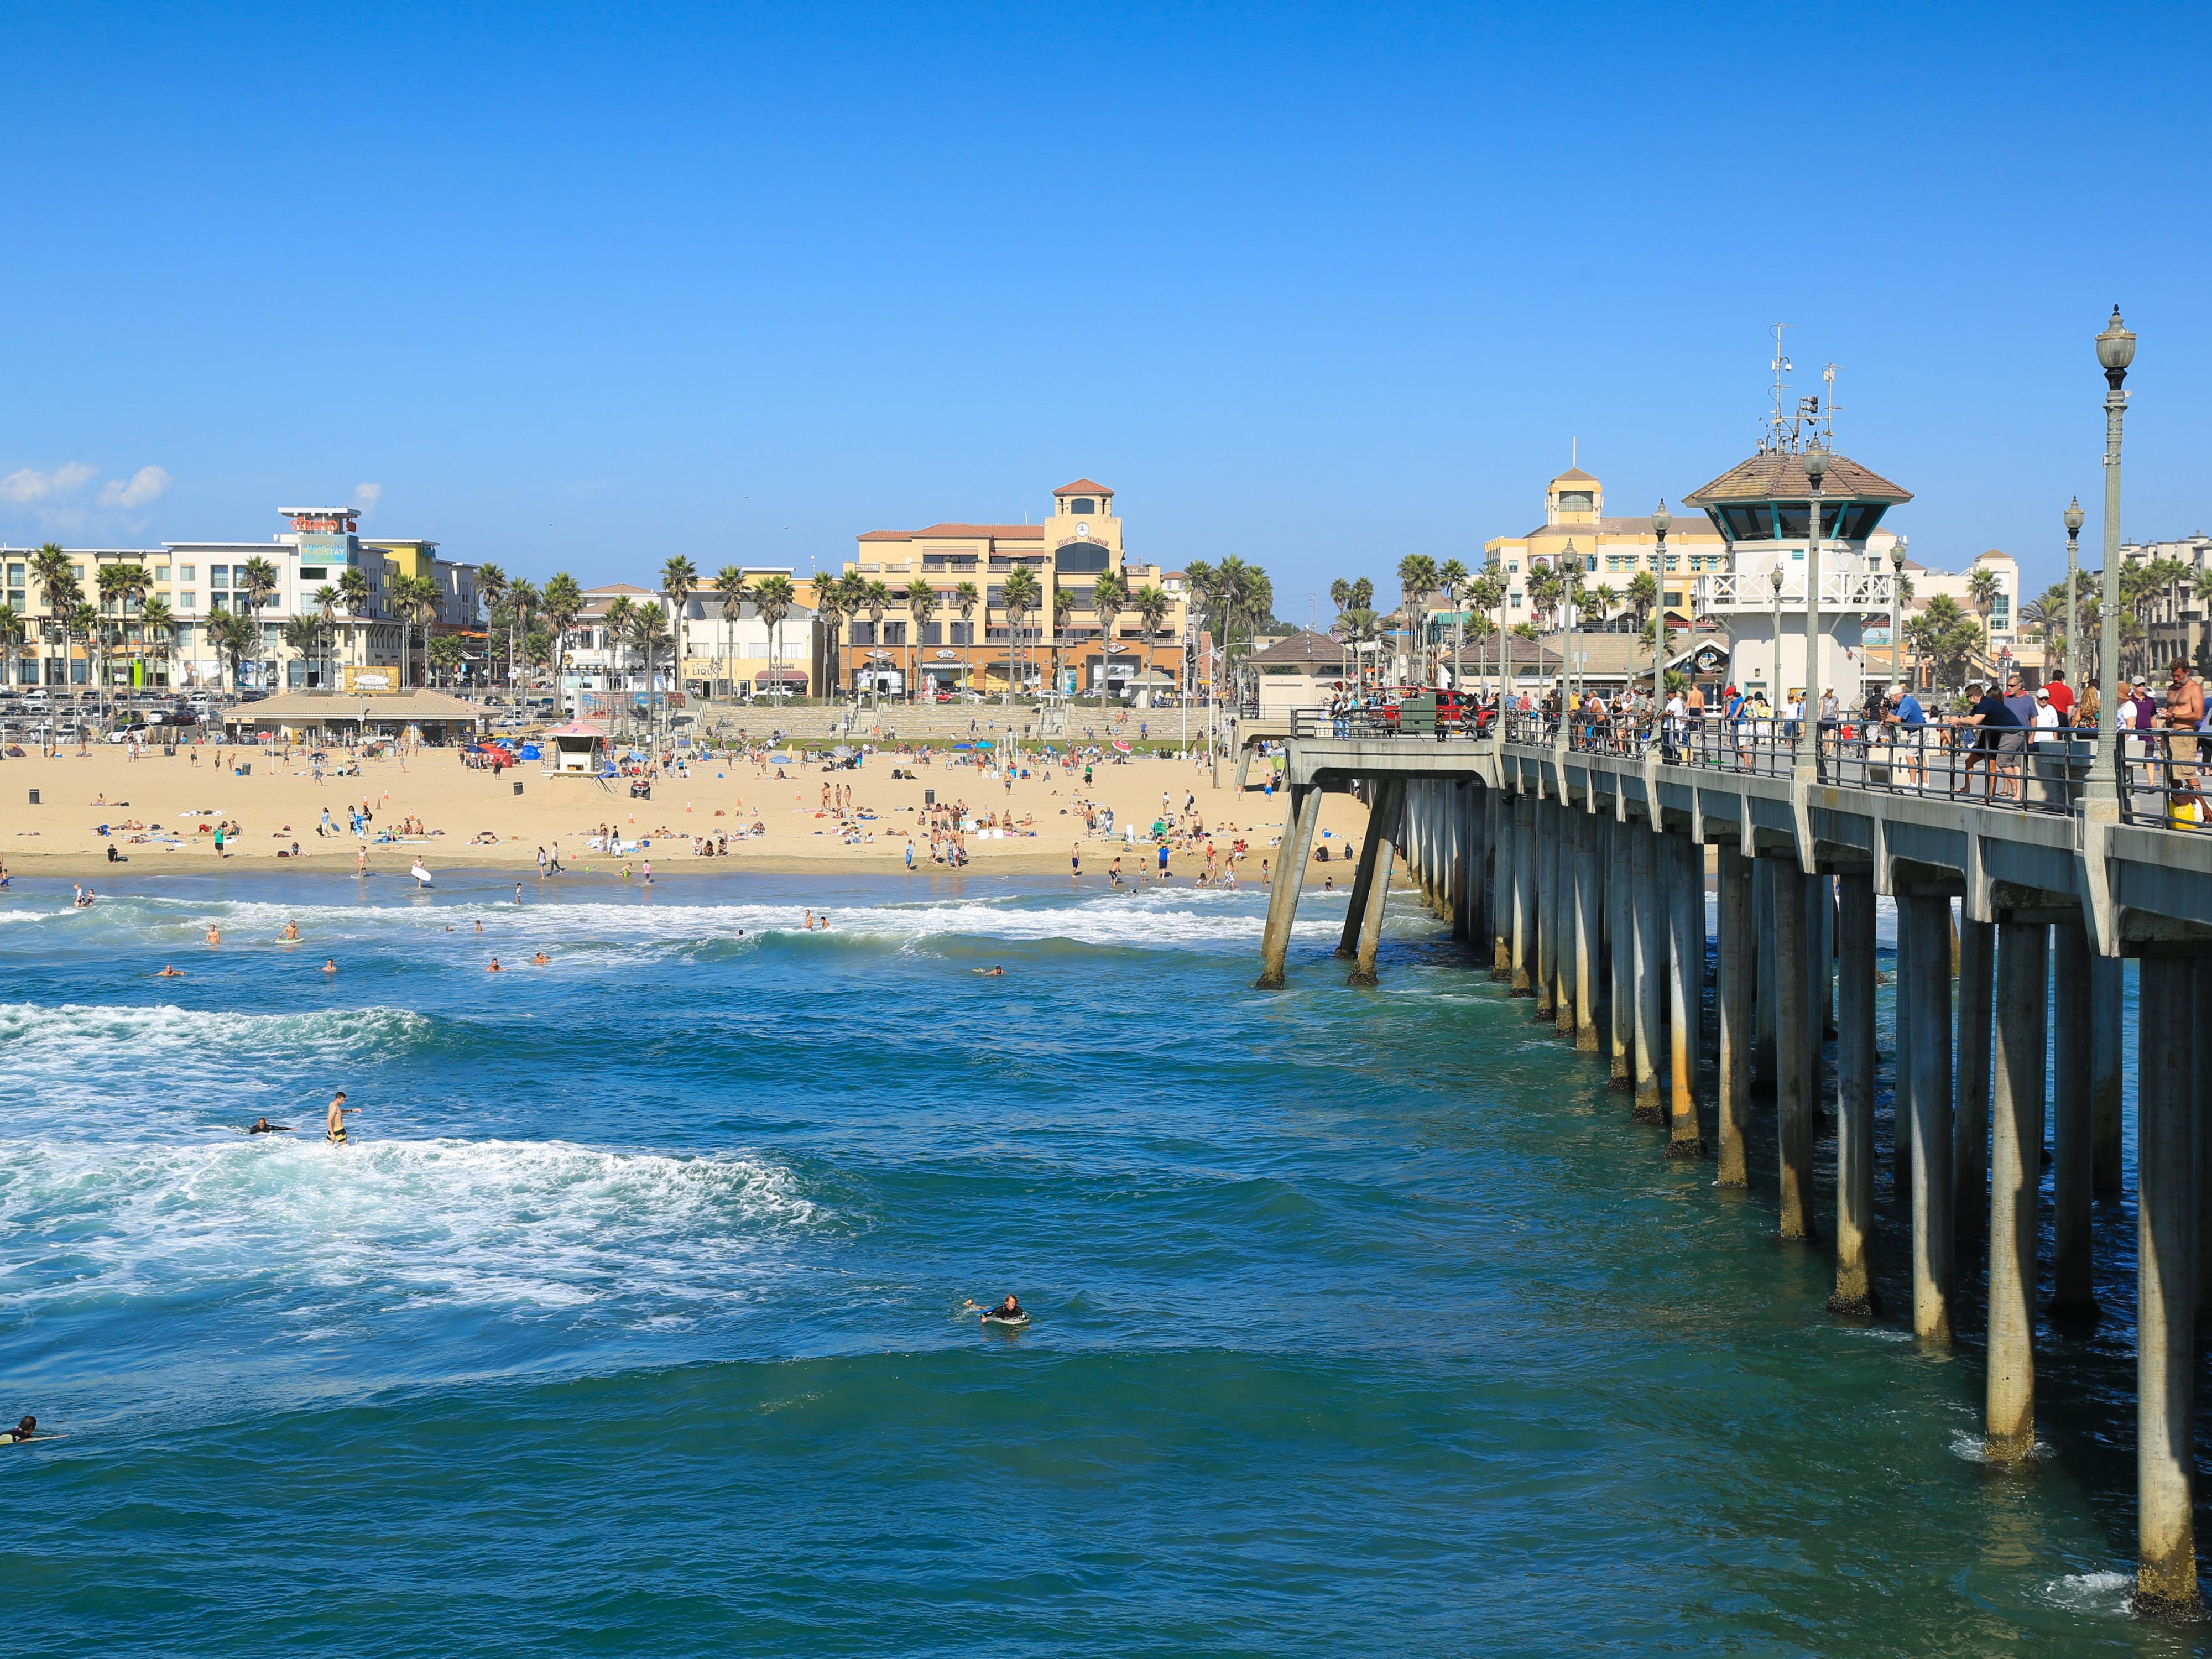 Our picturesque local beaches of Newport Beach and Huntington Beach are open for outdoor recreation. Enjoy swimming, surfing, bike rides and walks along the beach. Take a  well deserved break to relax in our OC sunshine.